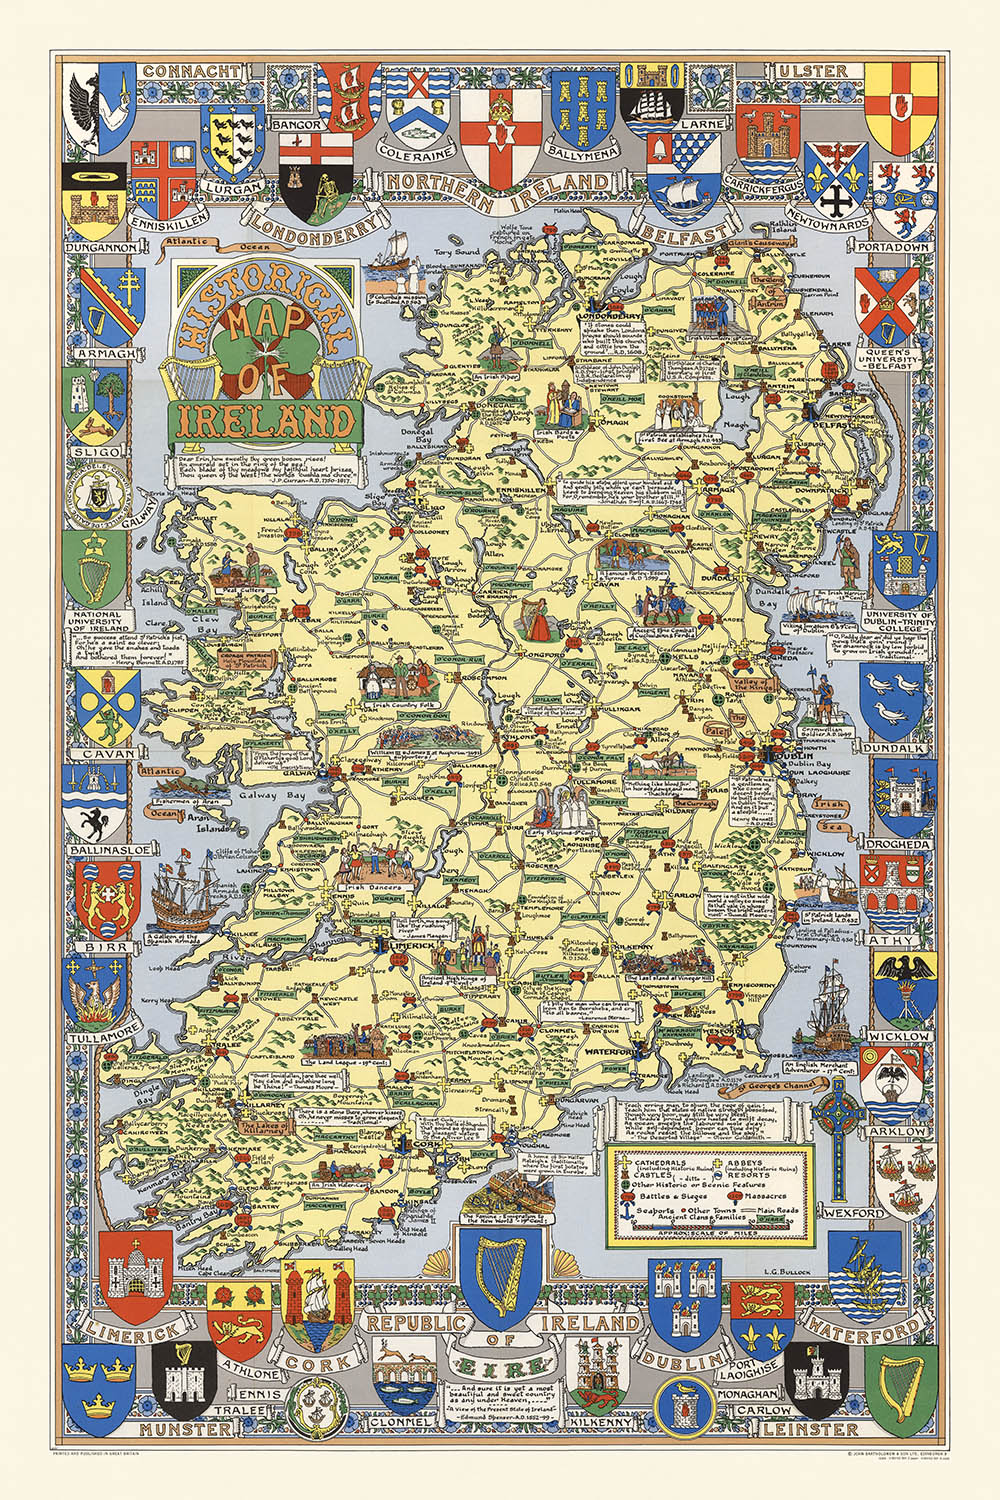 Old Pictorial Map of Ireland by Bullock, 1955: Historic Battles, Family Names, Coats of Arms